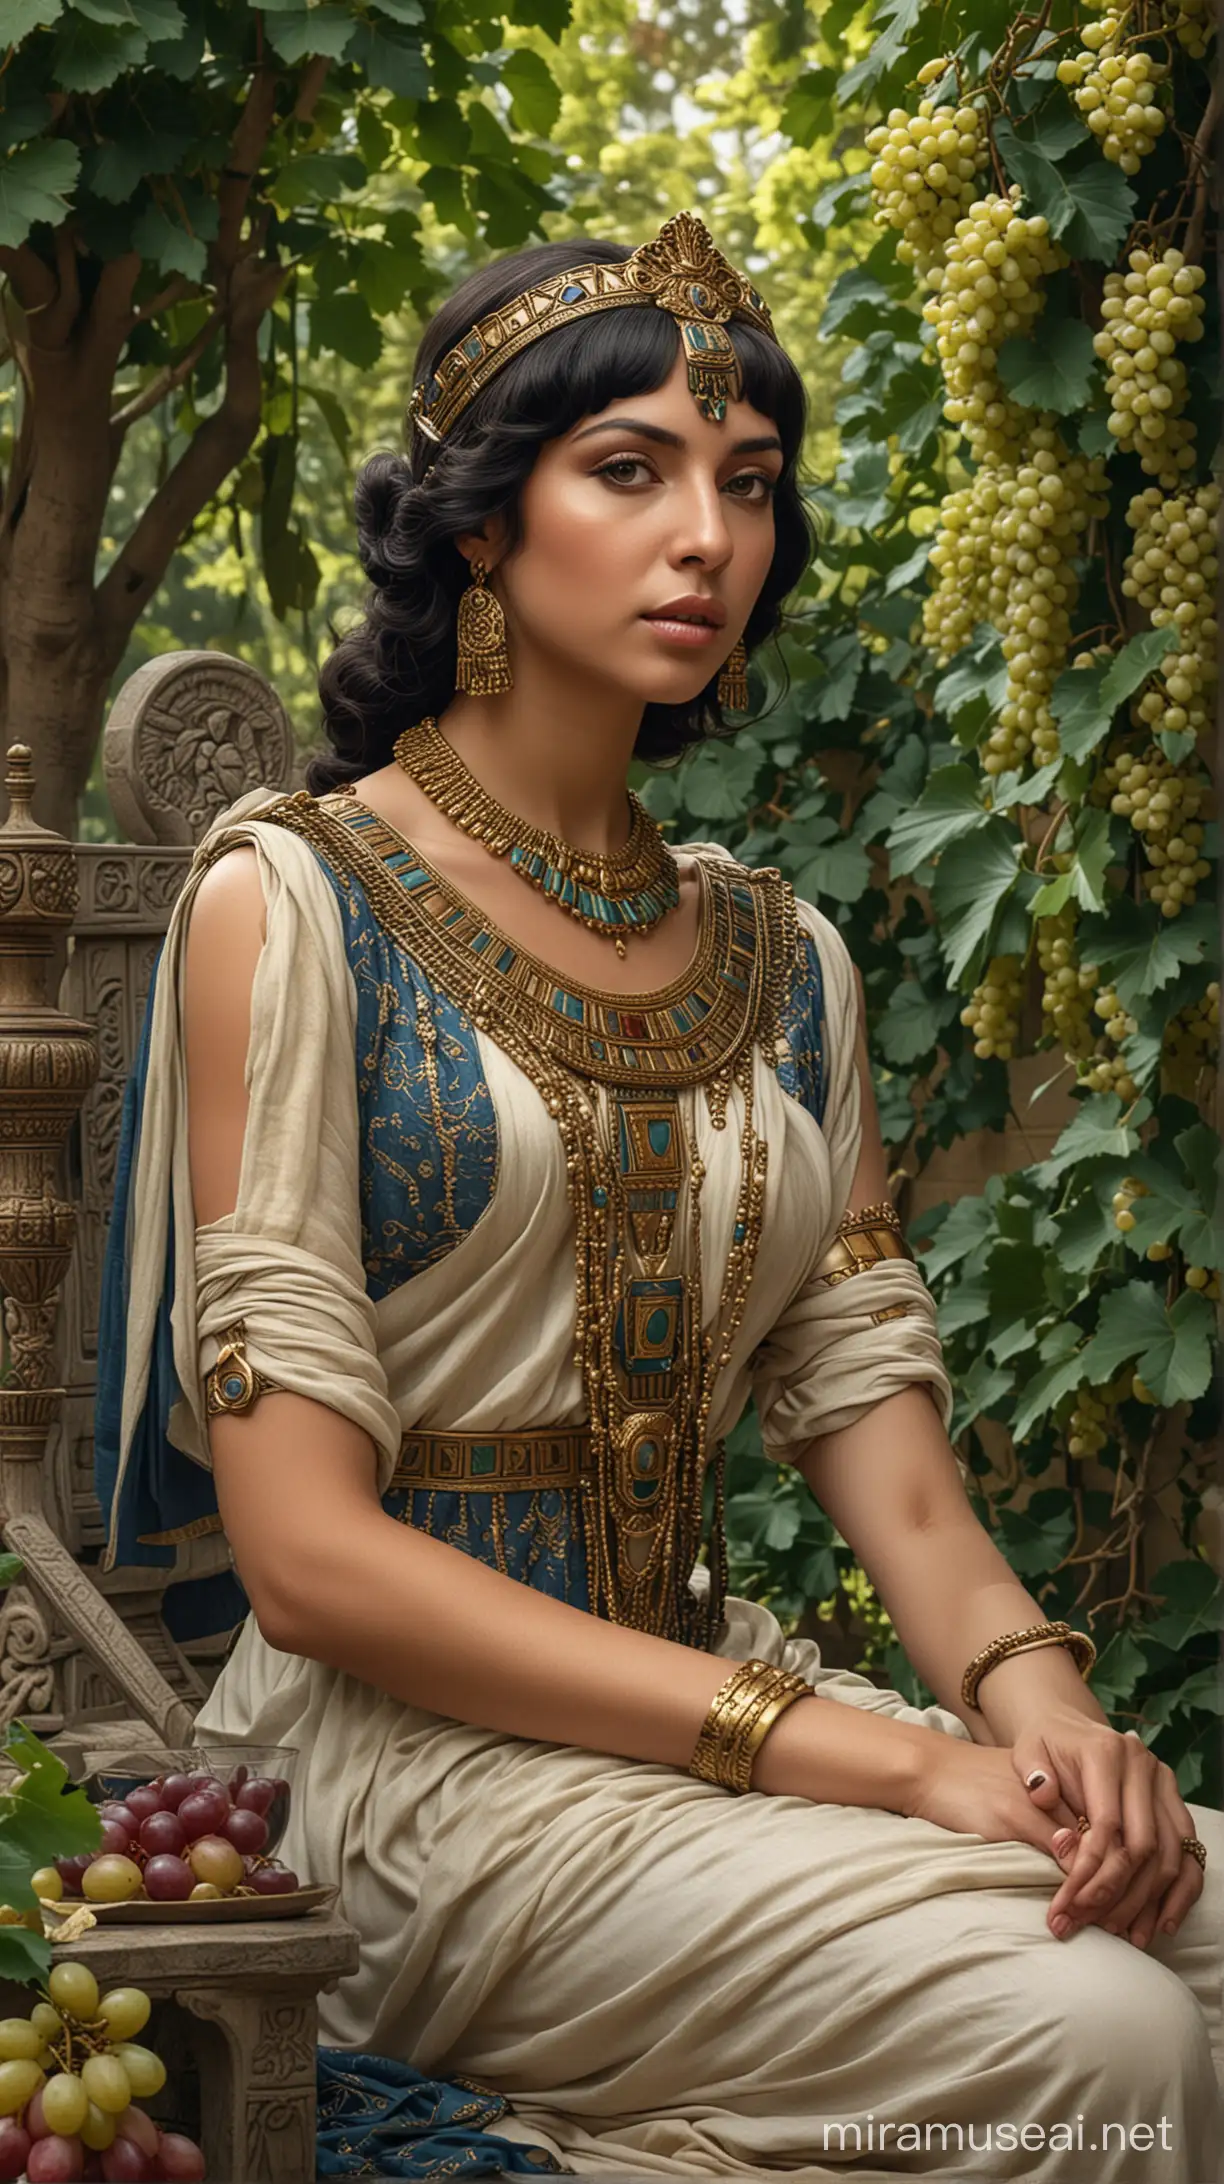 Hyper Realistic Portrait of Cleopatra Queen of Egypt Enjoying Grapes in a Luxurious Garden